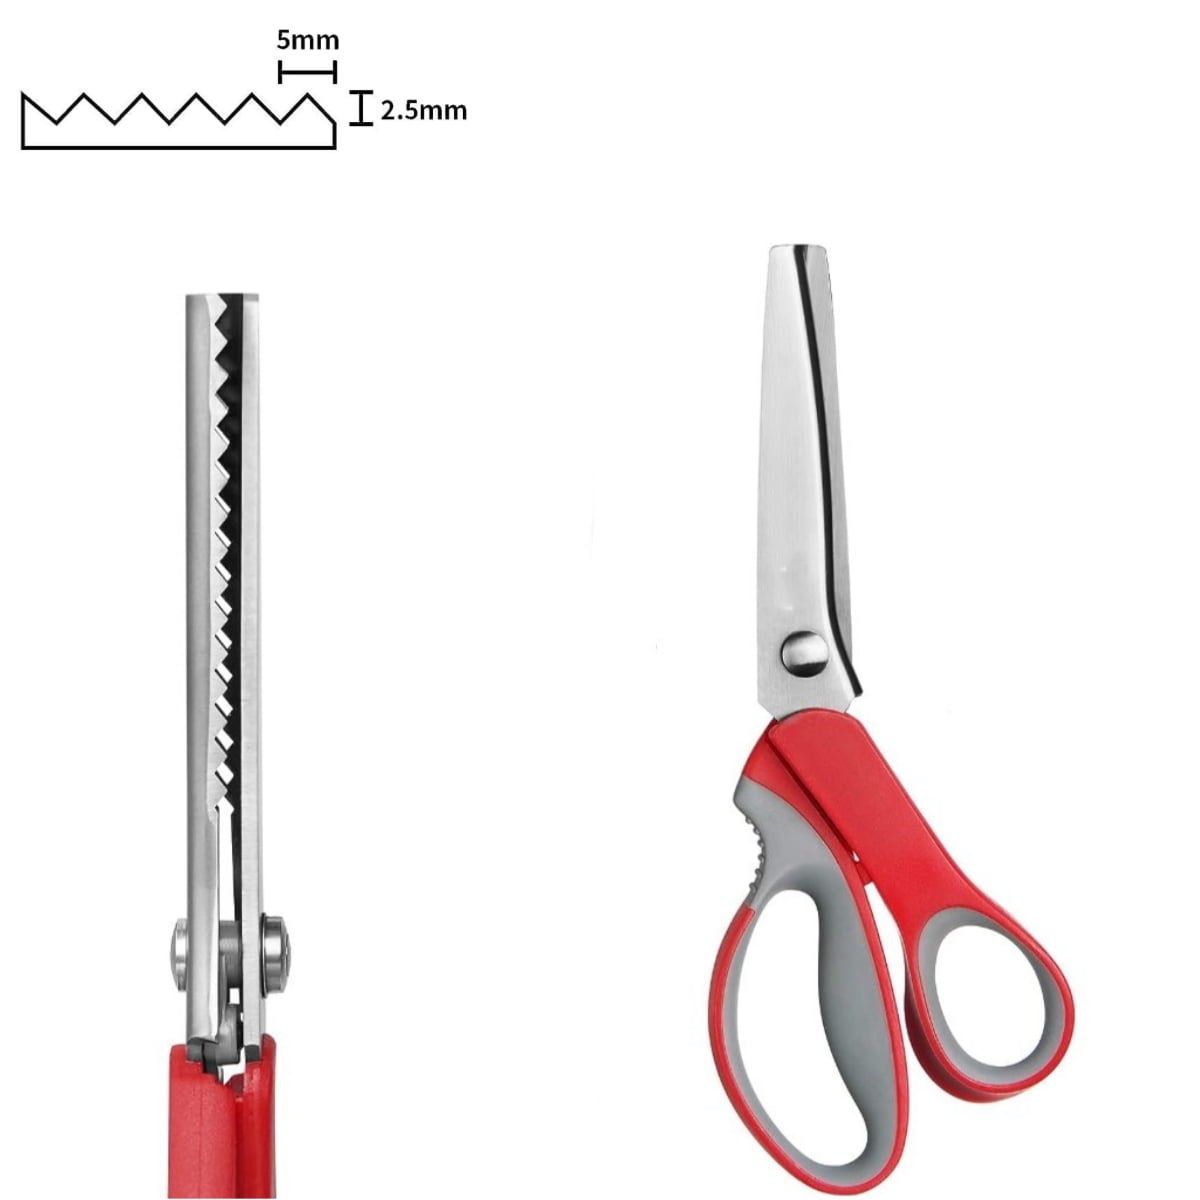 Pinking Shears Craft Scissors 9 Stainless Steel Pinking Shears Scissors  Fabric Craft Scrapbook Scissors, Decorative Zig Zag Sewing Cutter Scissors  with Comfort Grips for Fabric Cutting, Red Gray 